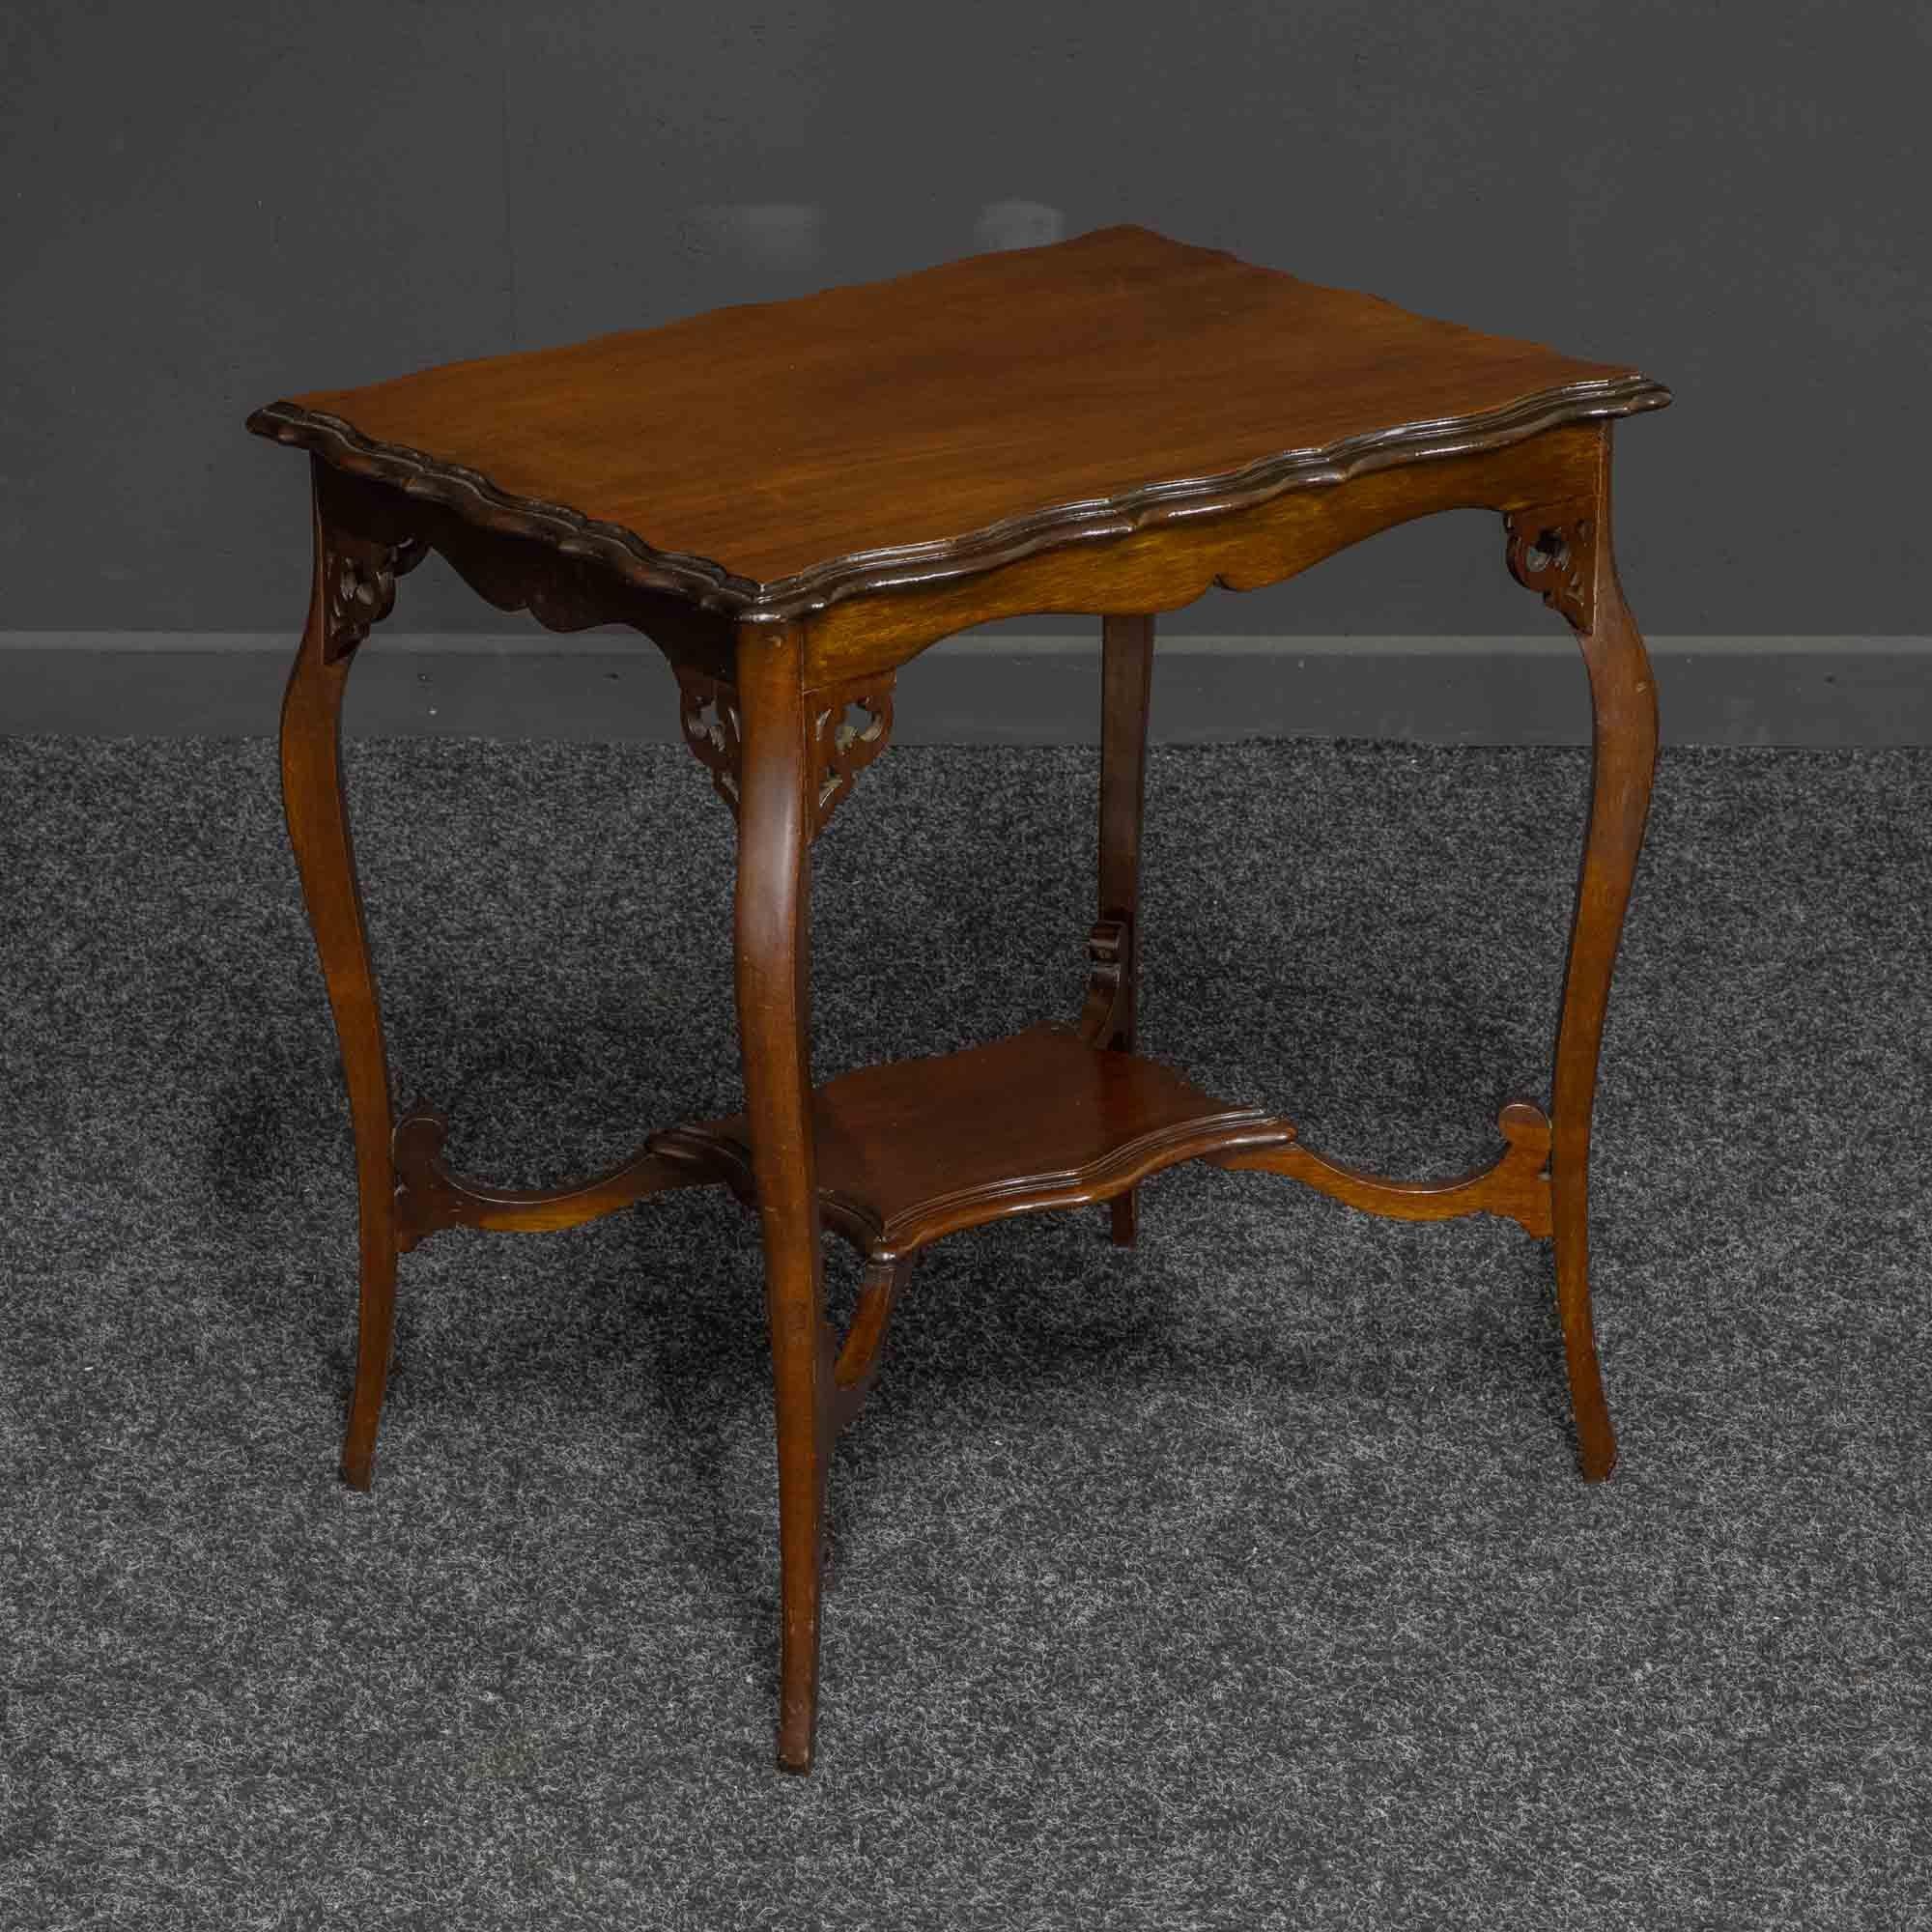 An attractive mahogany window table from the Edwardian period. The top is nicely figured and has an unusual 'wavy' edge. The cabriole legs have fretted brackets which adjoin the shaped apron. The under tier compliments the top in design and gives